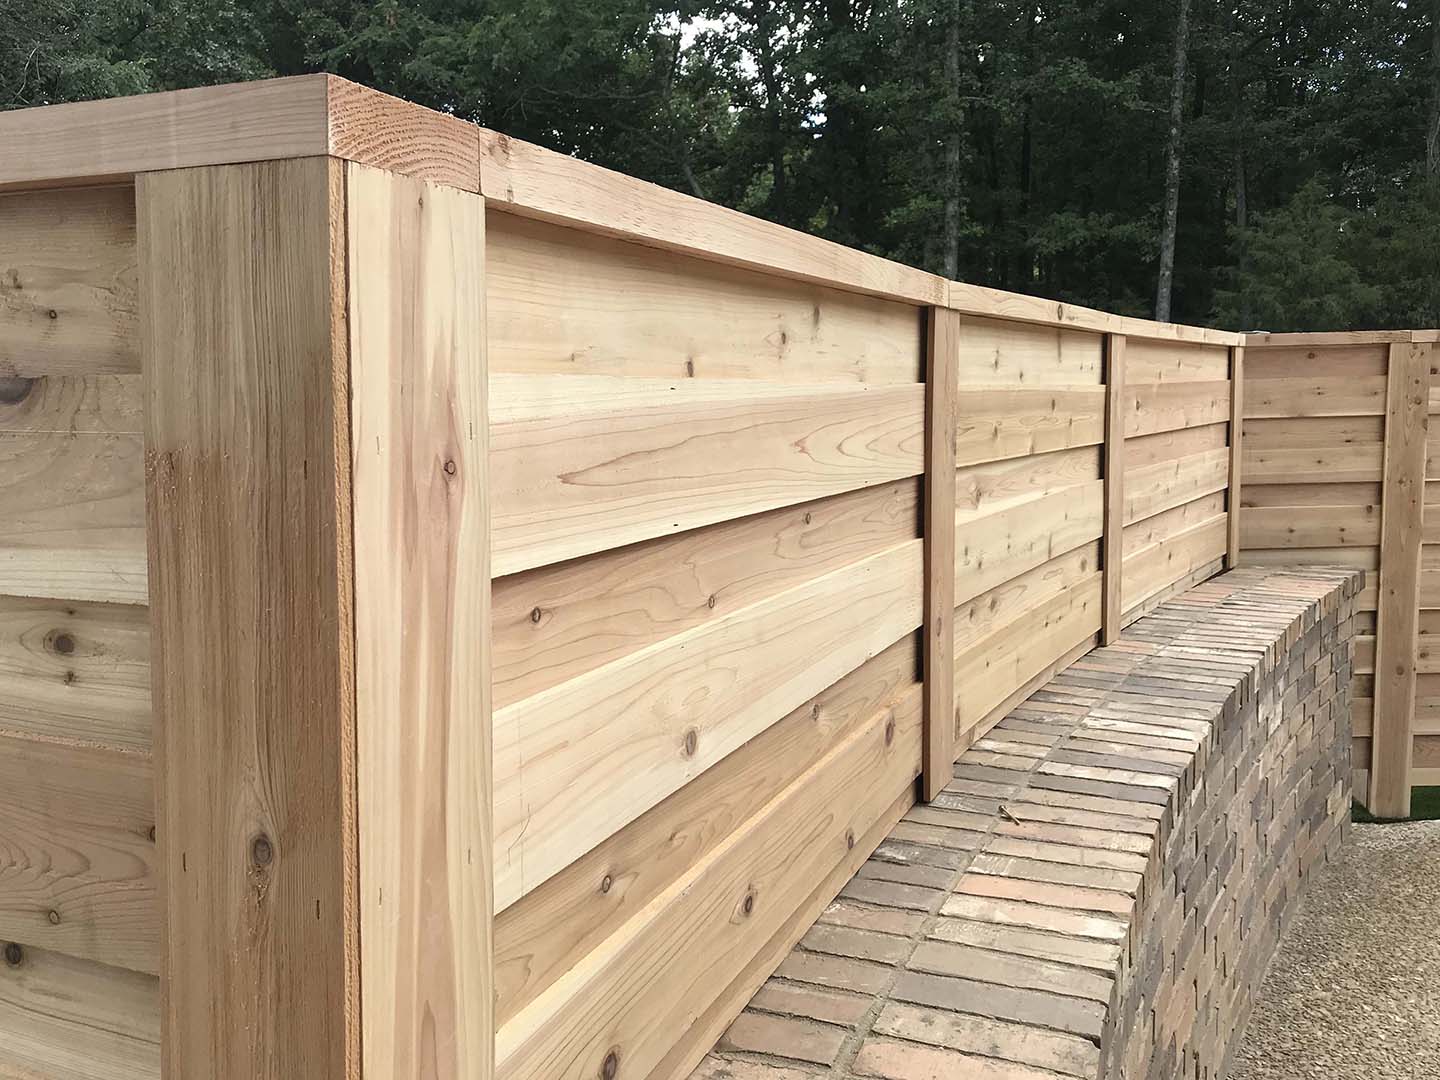 Fayetteville AR cap and trim style wood fence